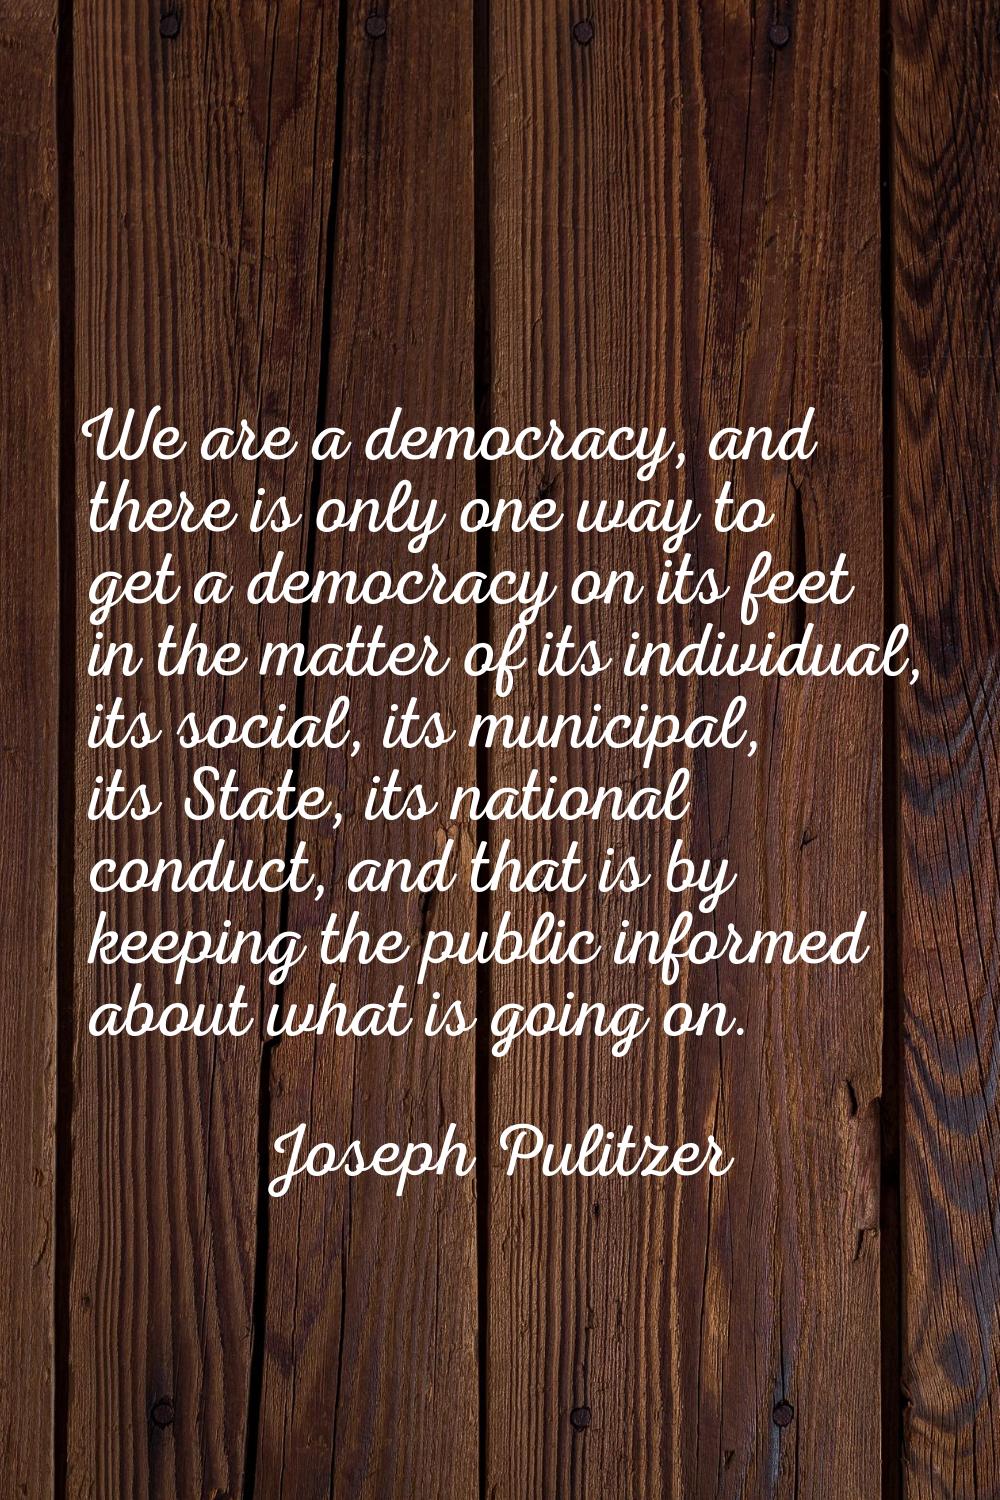 We are a democracy, and there is only one way to get a democracy on its feet in the matter of its i